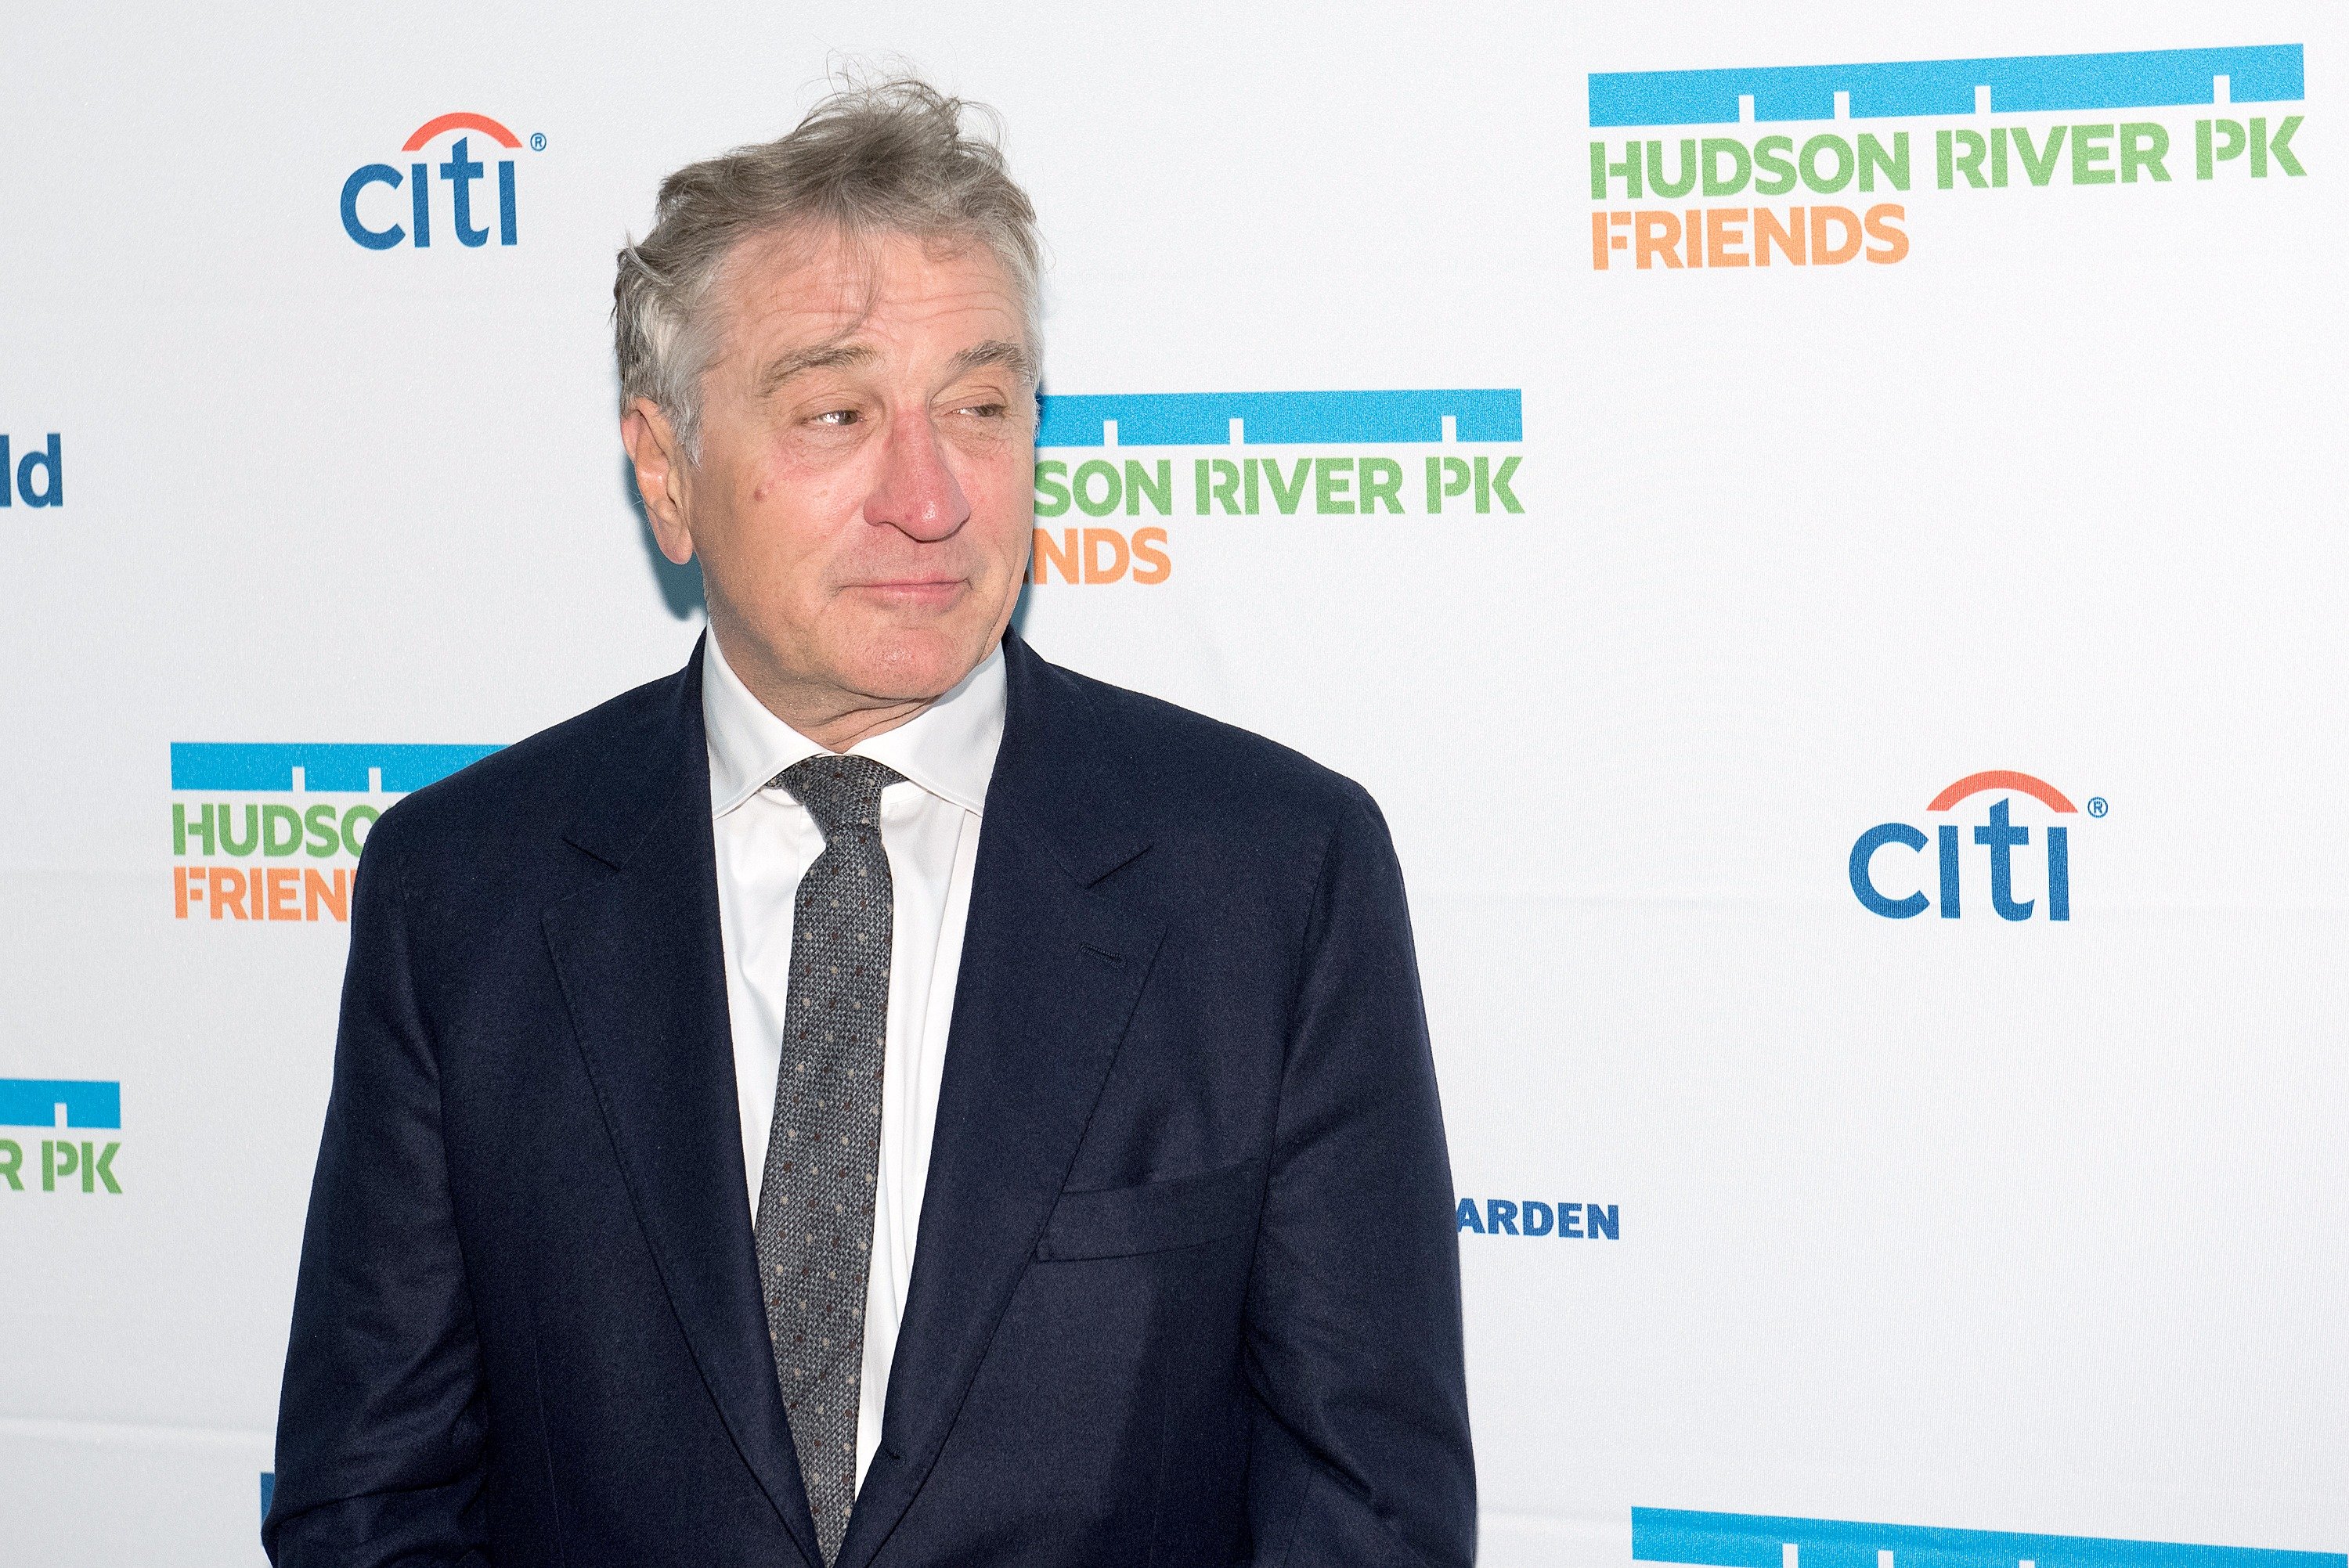 Robert De Niro at the 2017 Hudson River Park Annual Gala on October 12, 2017 in New York City | Photo: Getty Images